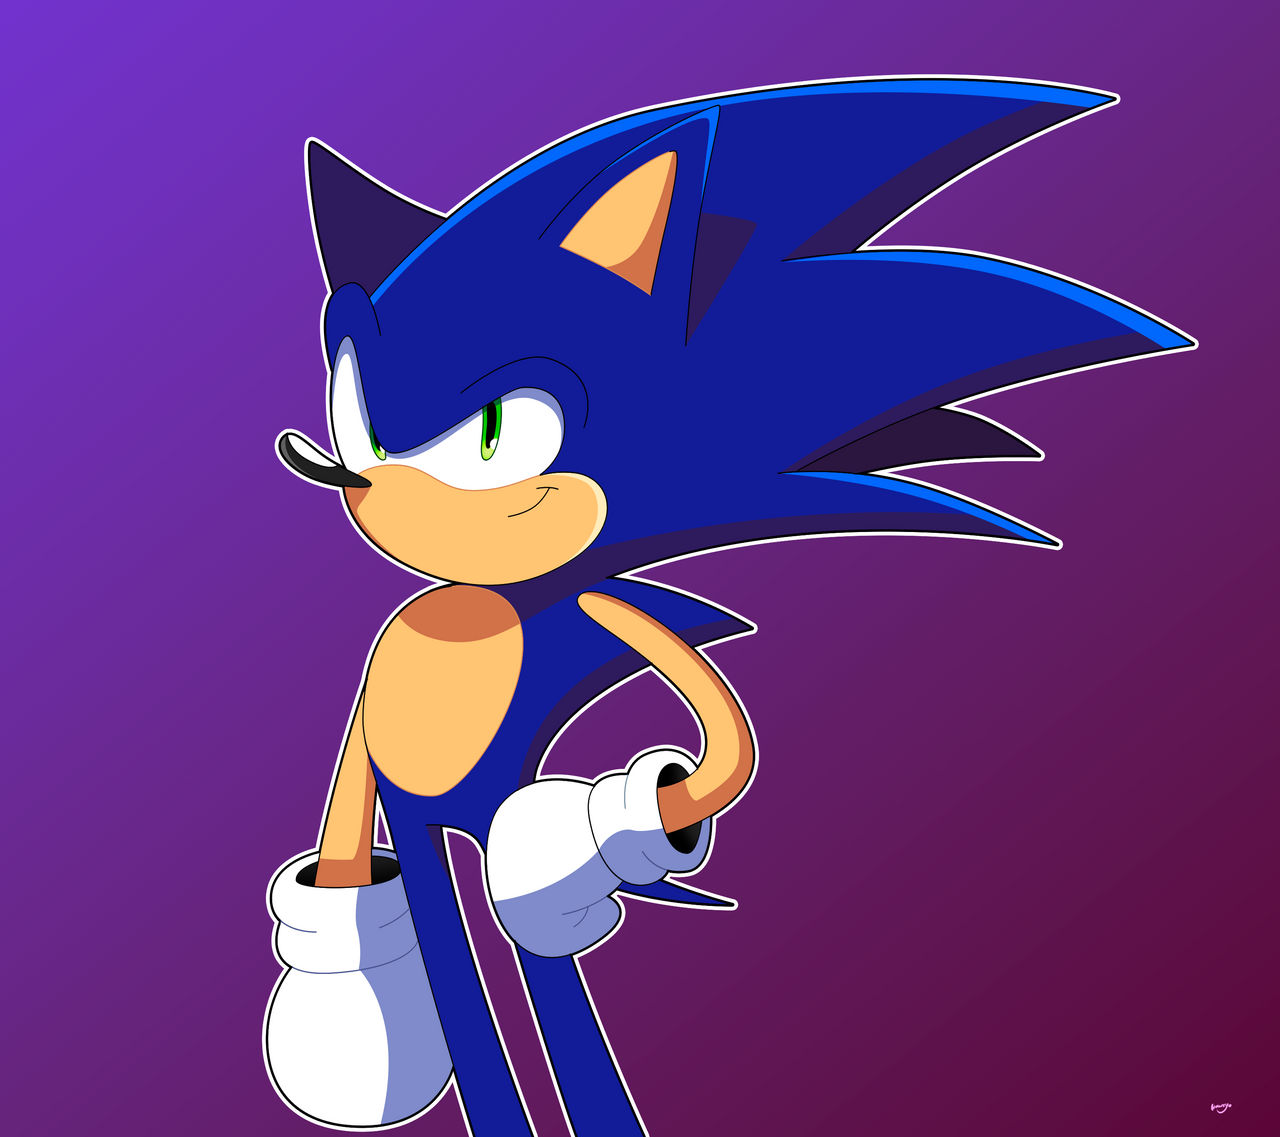 STH) A Classic Sonic by HowteyoArts on DeviantArt